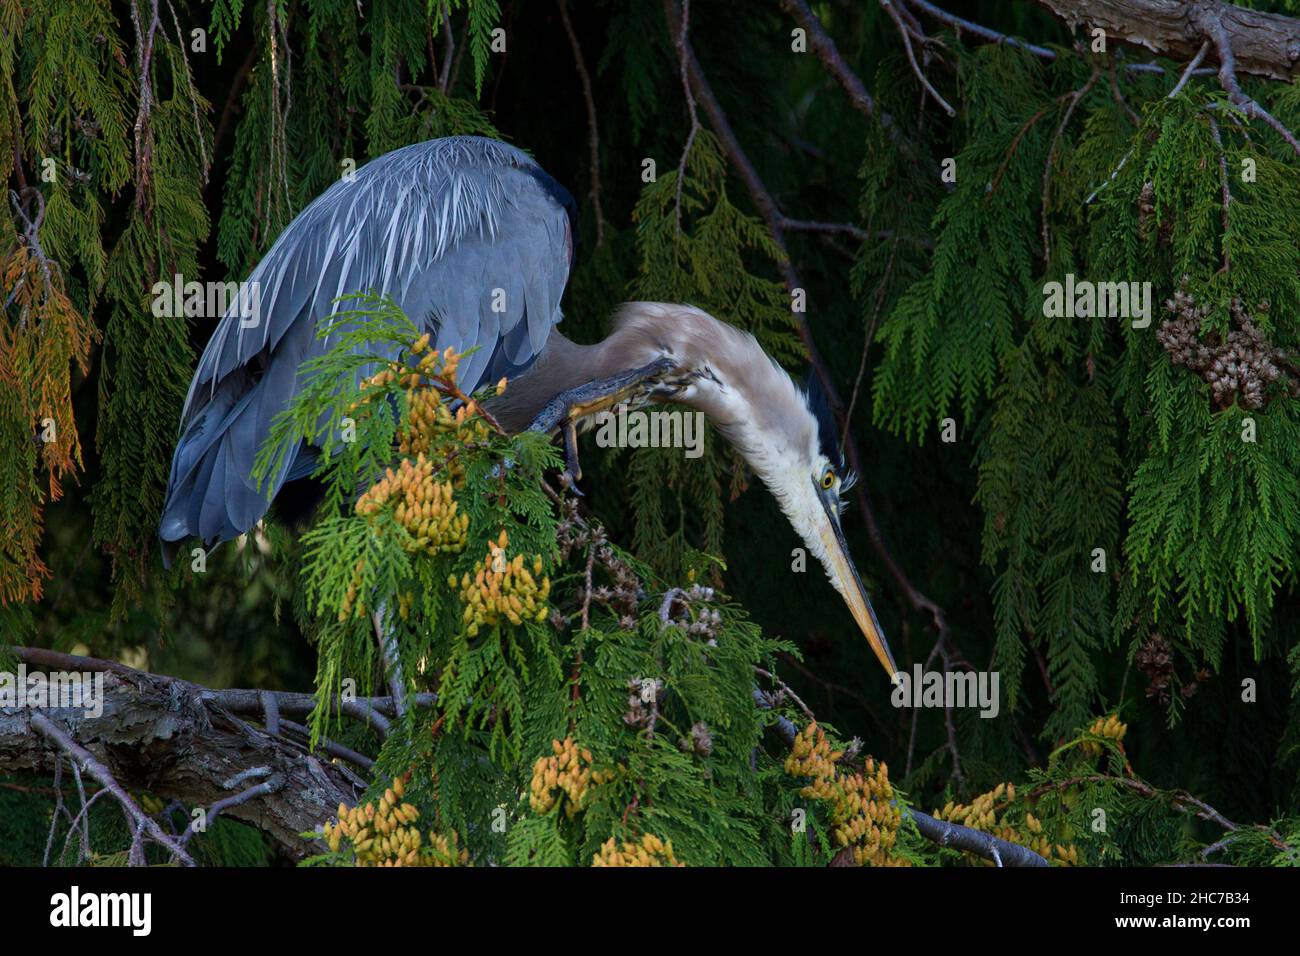 A Great Blue Heron (Ardea herodias) perched on a branch of a cedar tree, in Nanaimo, Vancouver Island, BC, Canada in September Stock Photo